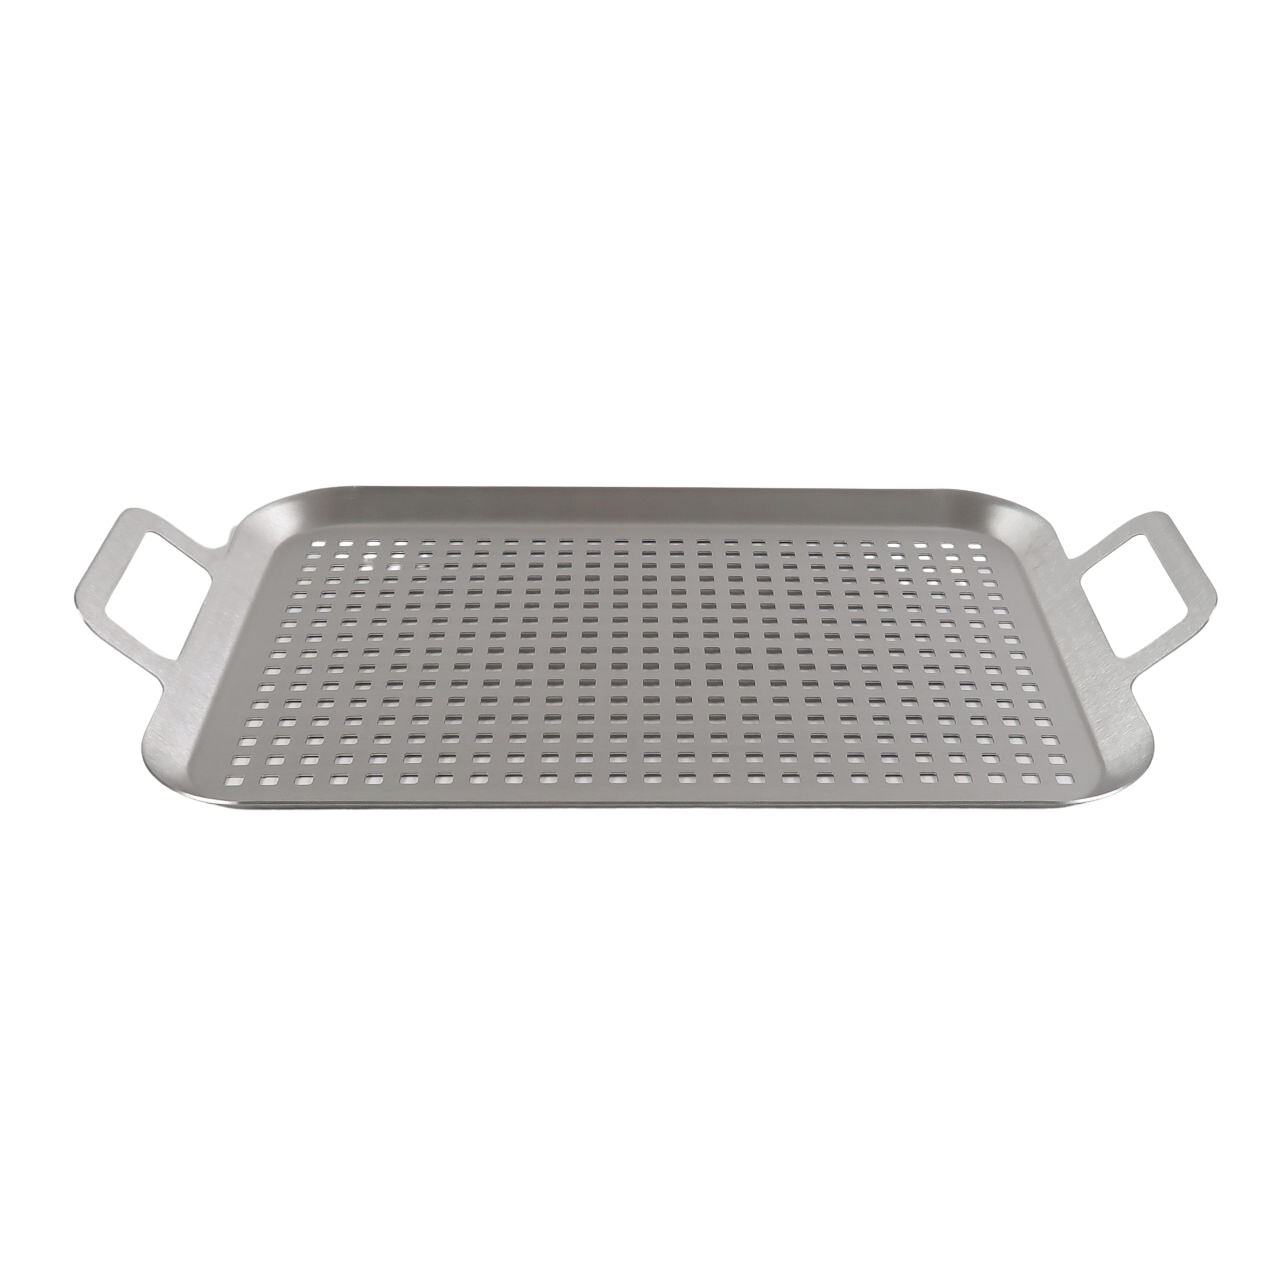 Garden Trading Stainless Steel Tray - Large